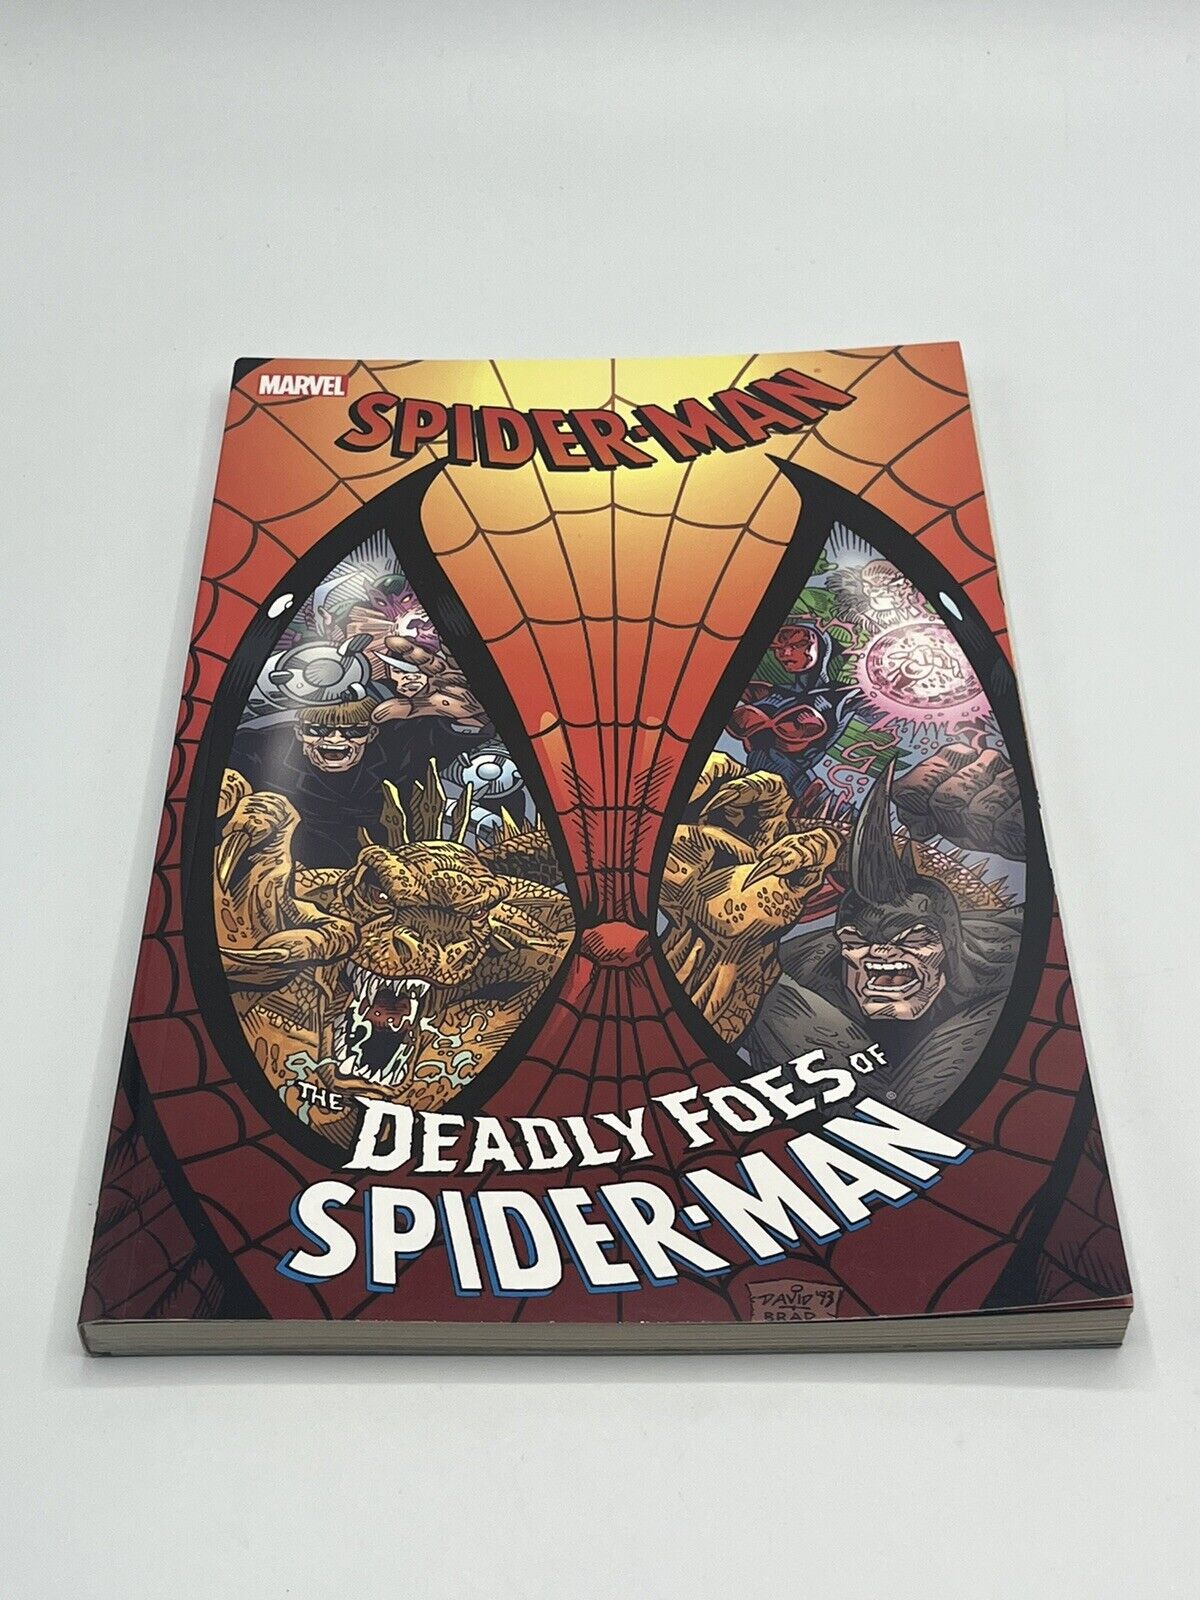 New Spider-Man The Deadly Foes of Spider-Man Marvel TPB Trade Paperback